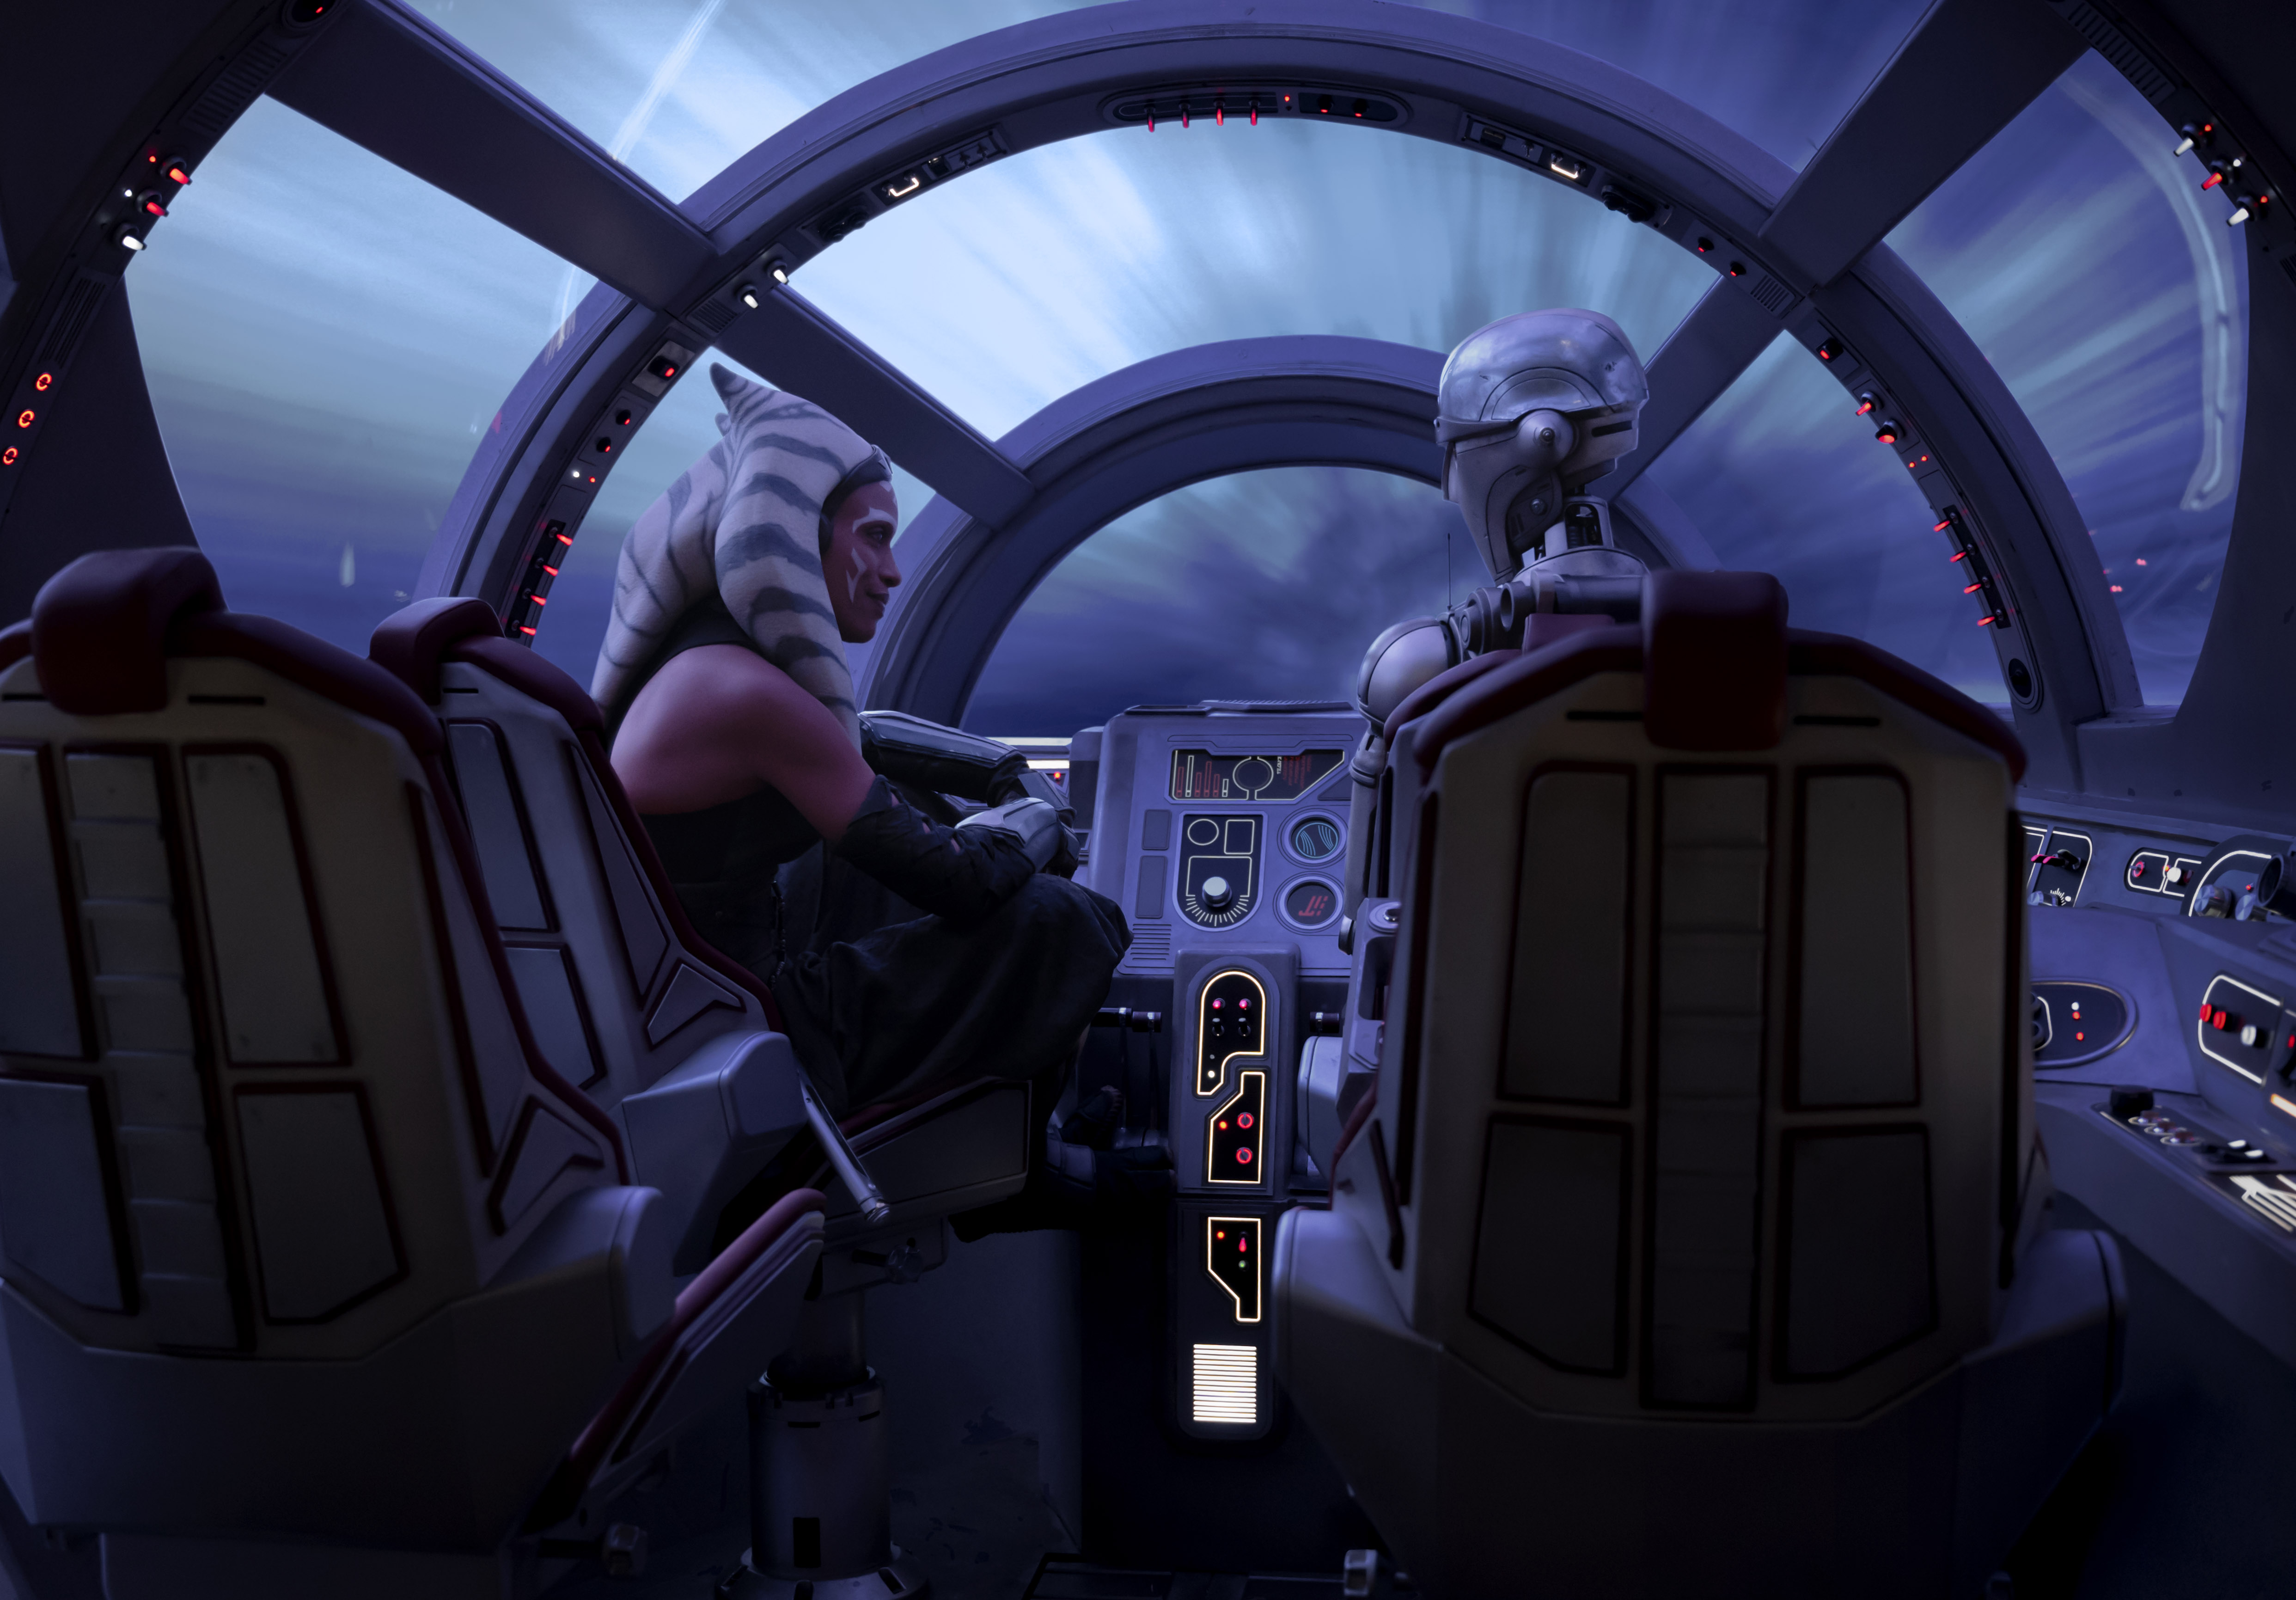 HD desktop wallpaper featuring Ahsoka in a spaceship cockpit with a dramatic view of space in the background.